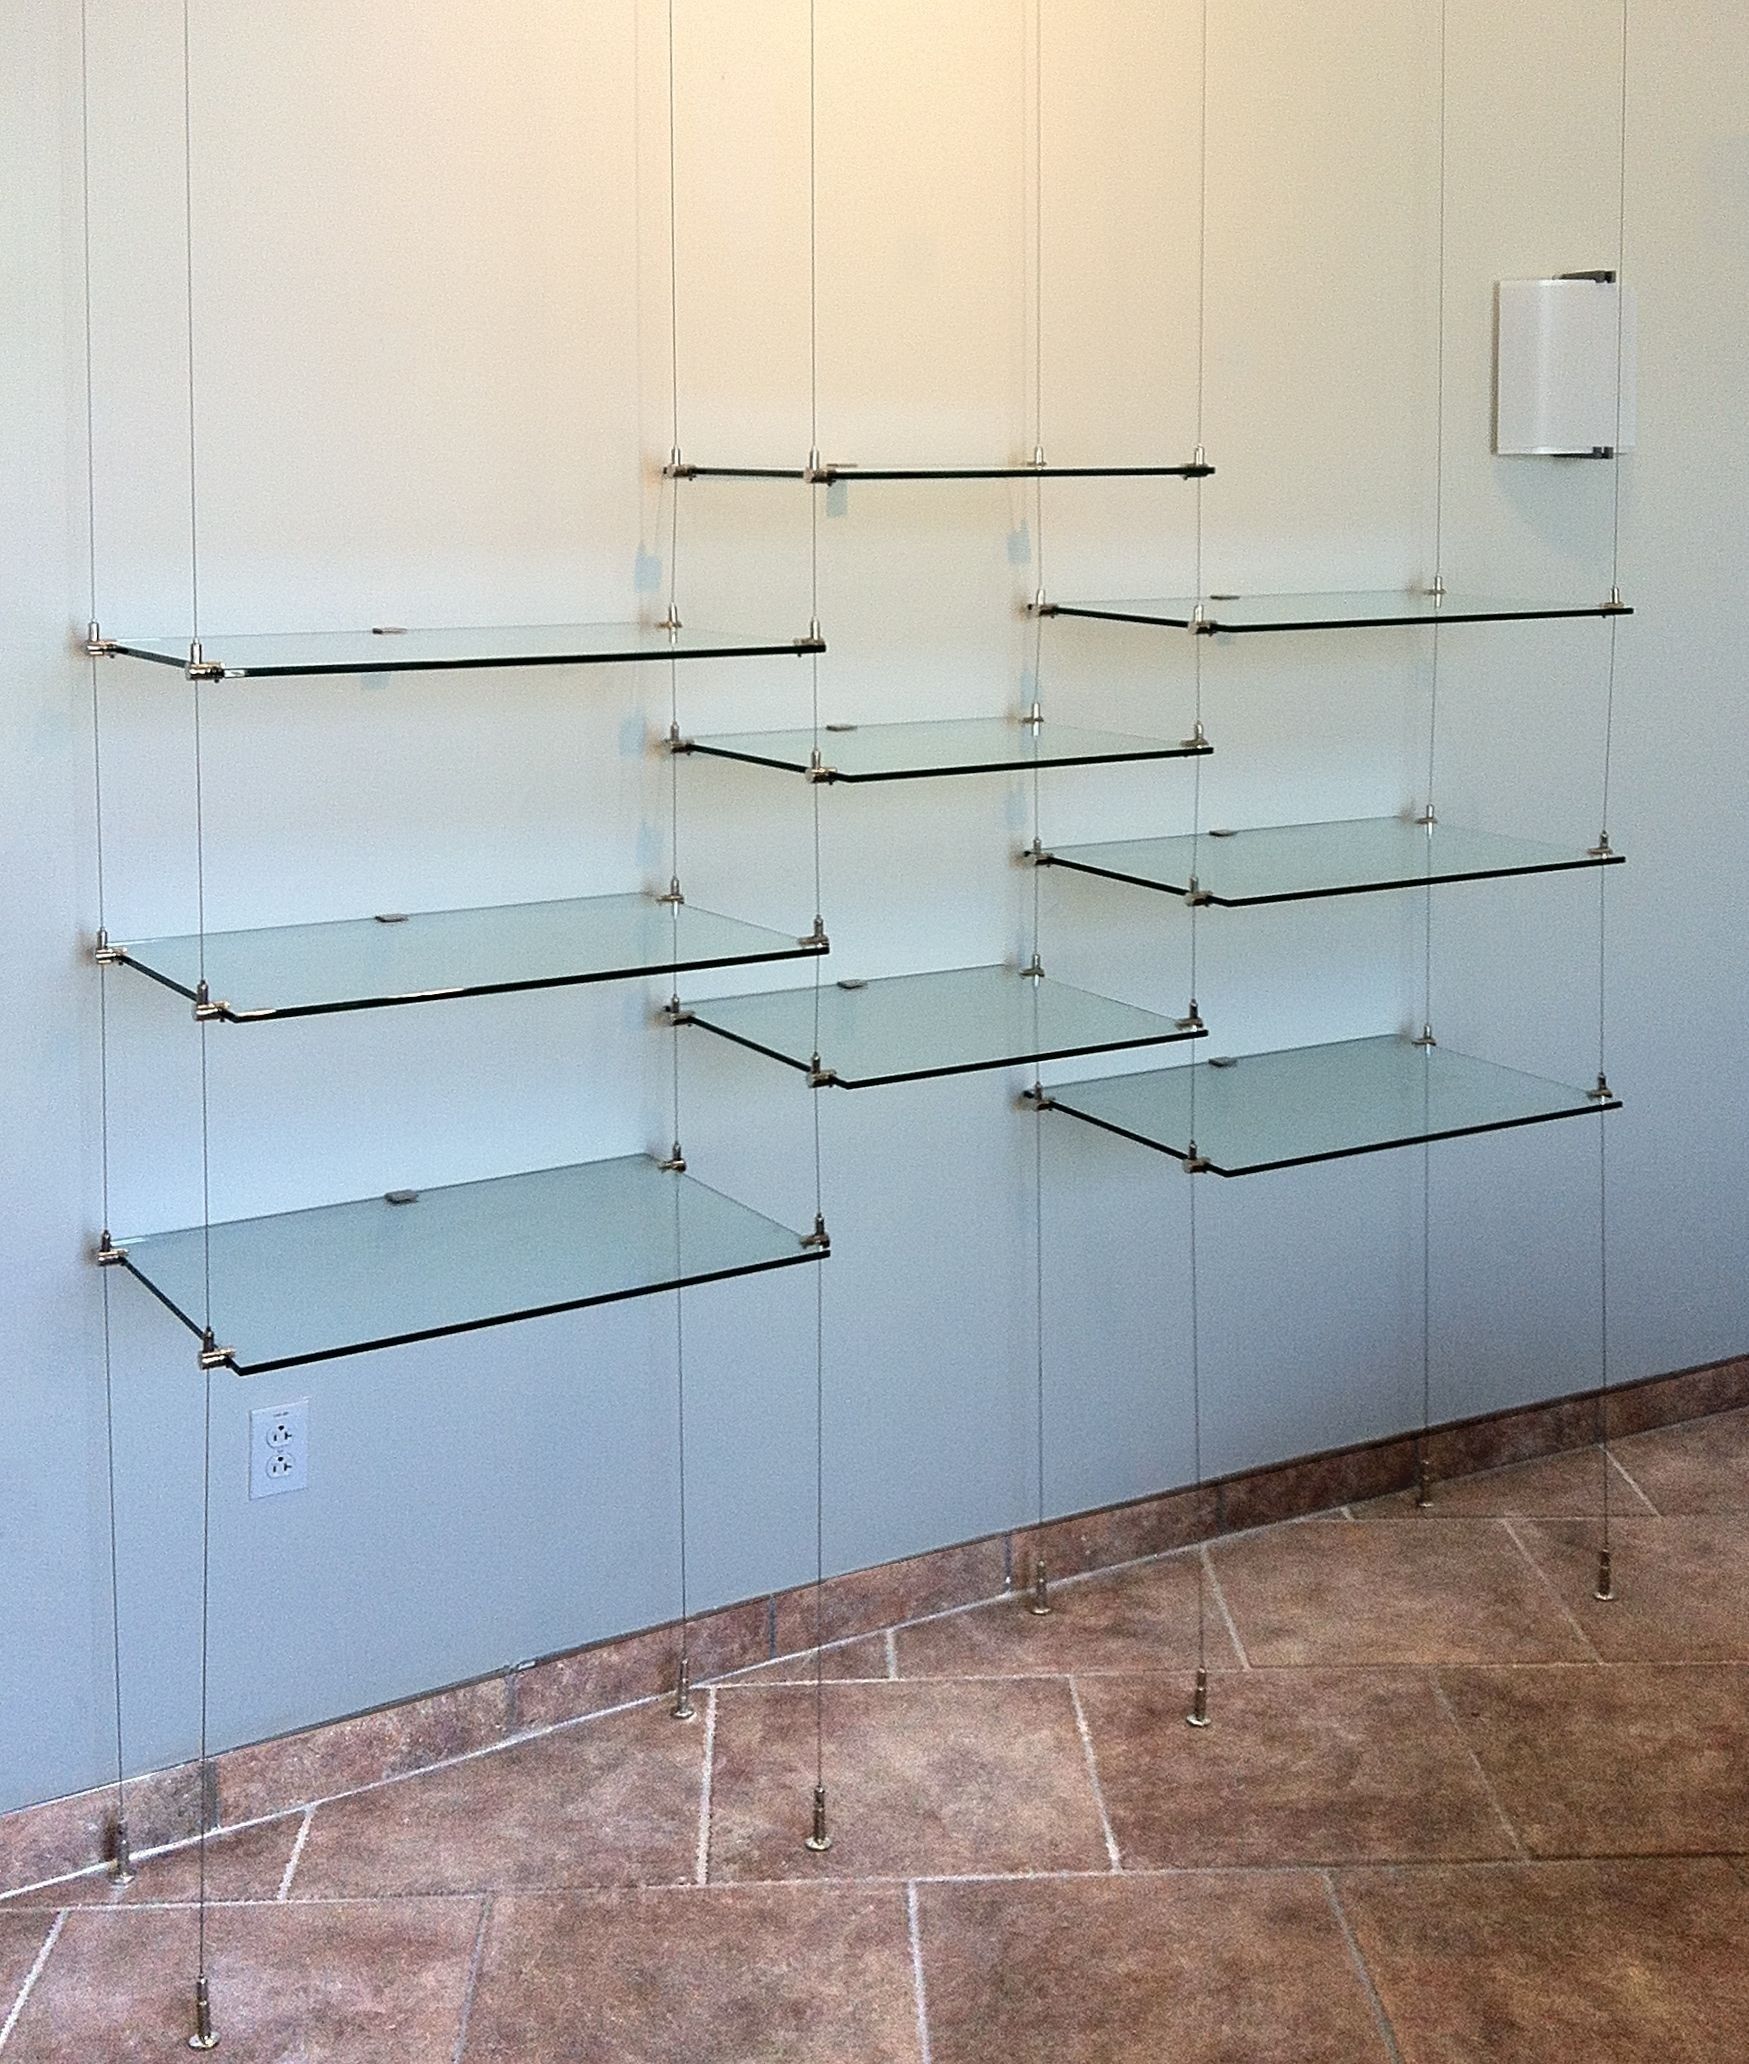 Ceiling Hanging Shelves Kitchen Kitchen Shelf Glass On Stainless Regarding Suspended Glass Shelving (View 8 of 15)